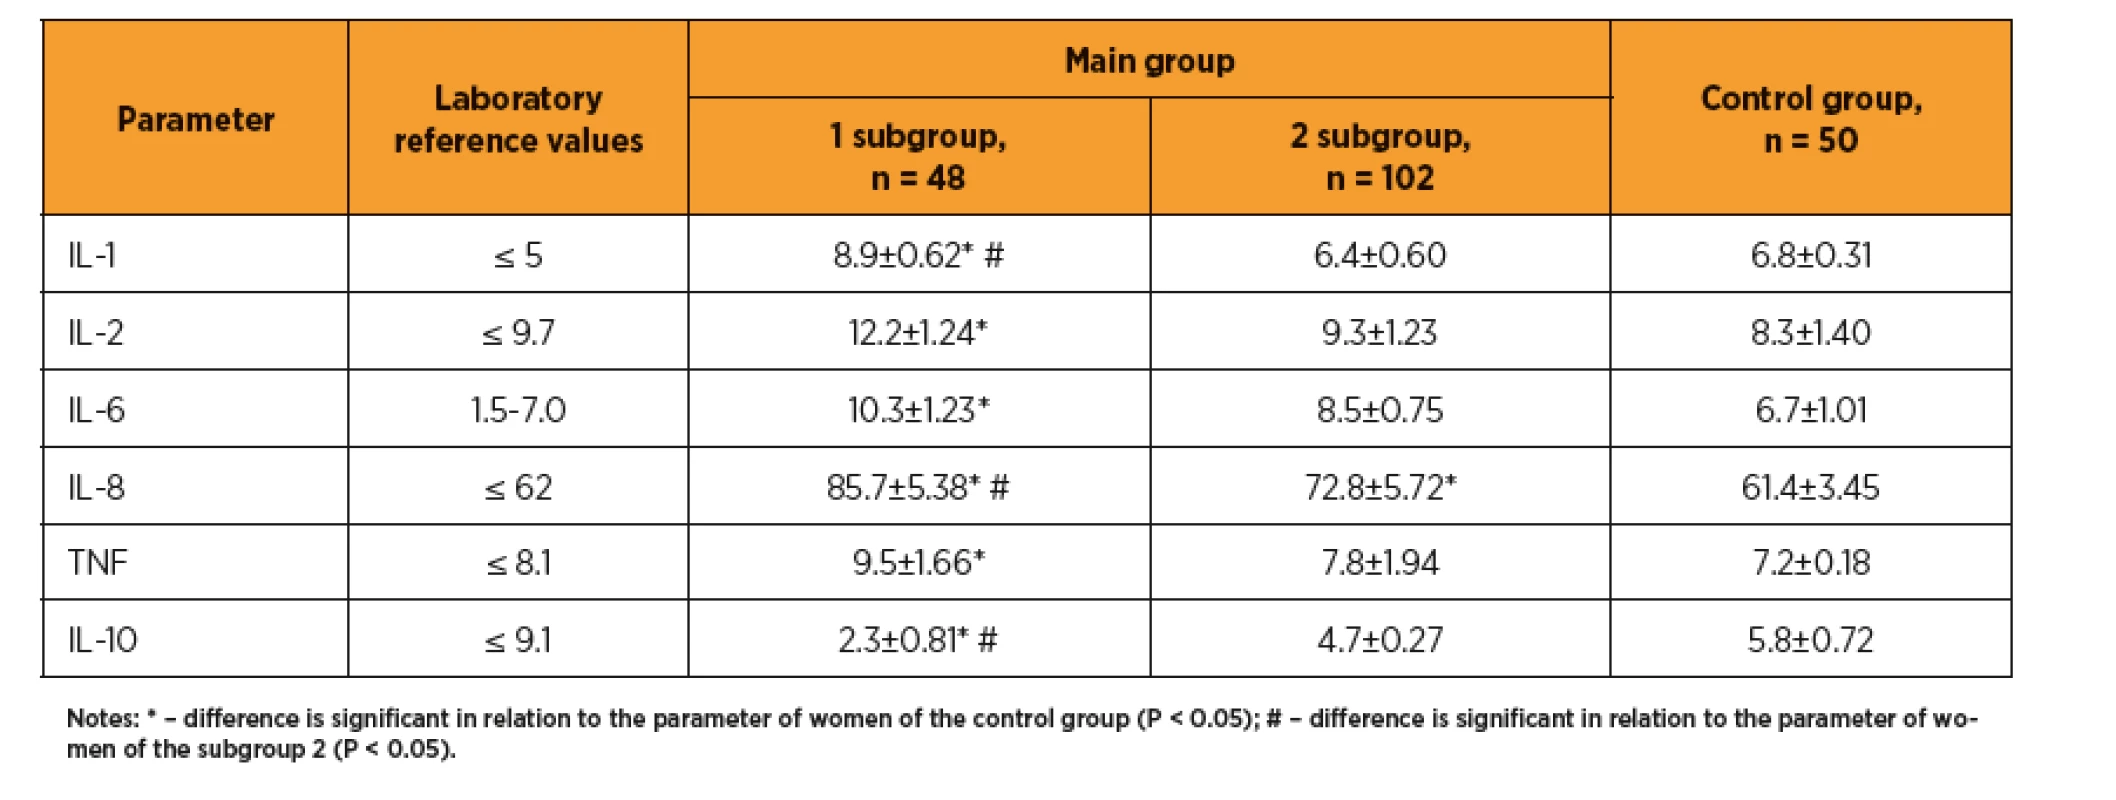 Cytokine profile in pregnant woman after ART, ng/ml